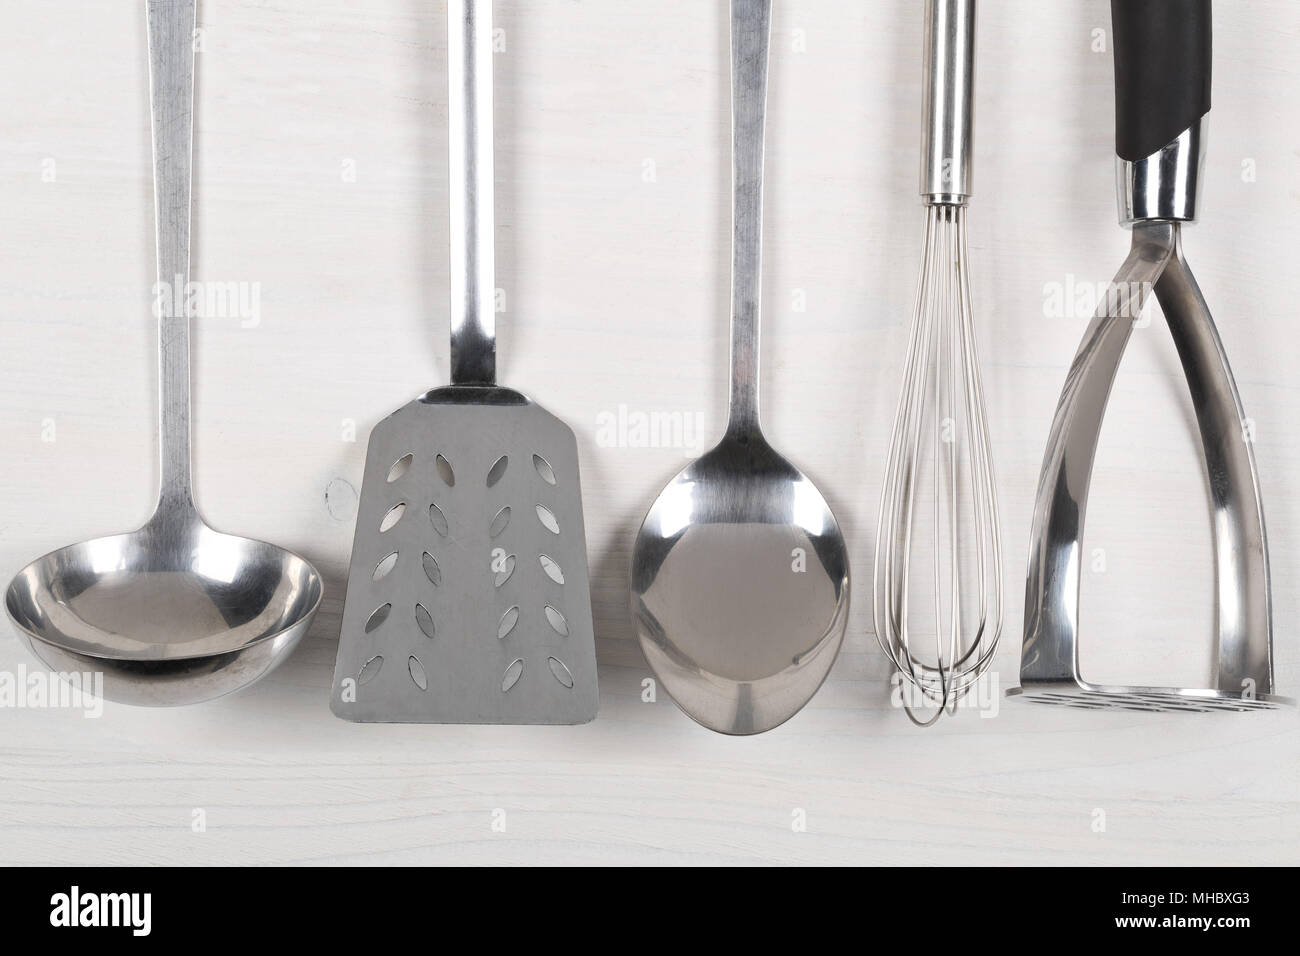 https://c8.alamy.com/comp/MHBXG3/row-of-metal-kitchen-tools-with-spoons-and-spatulas-from-above-on-white-wooden-board-background-MHBXG3.jpg